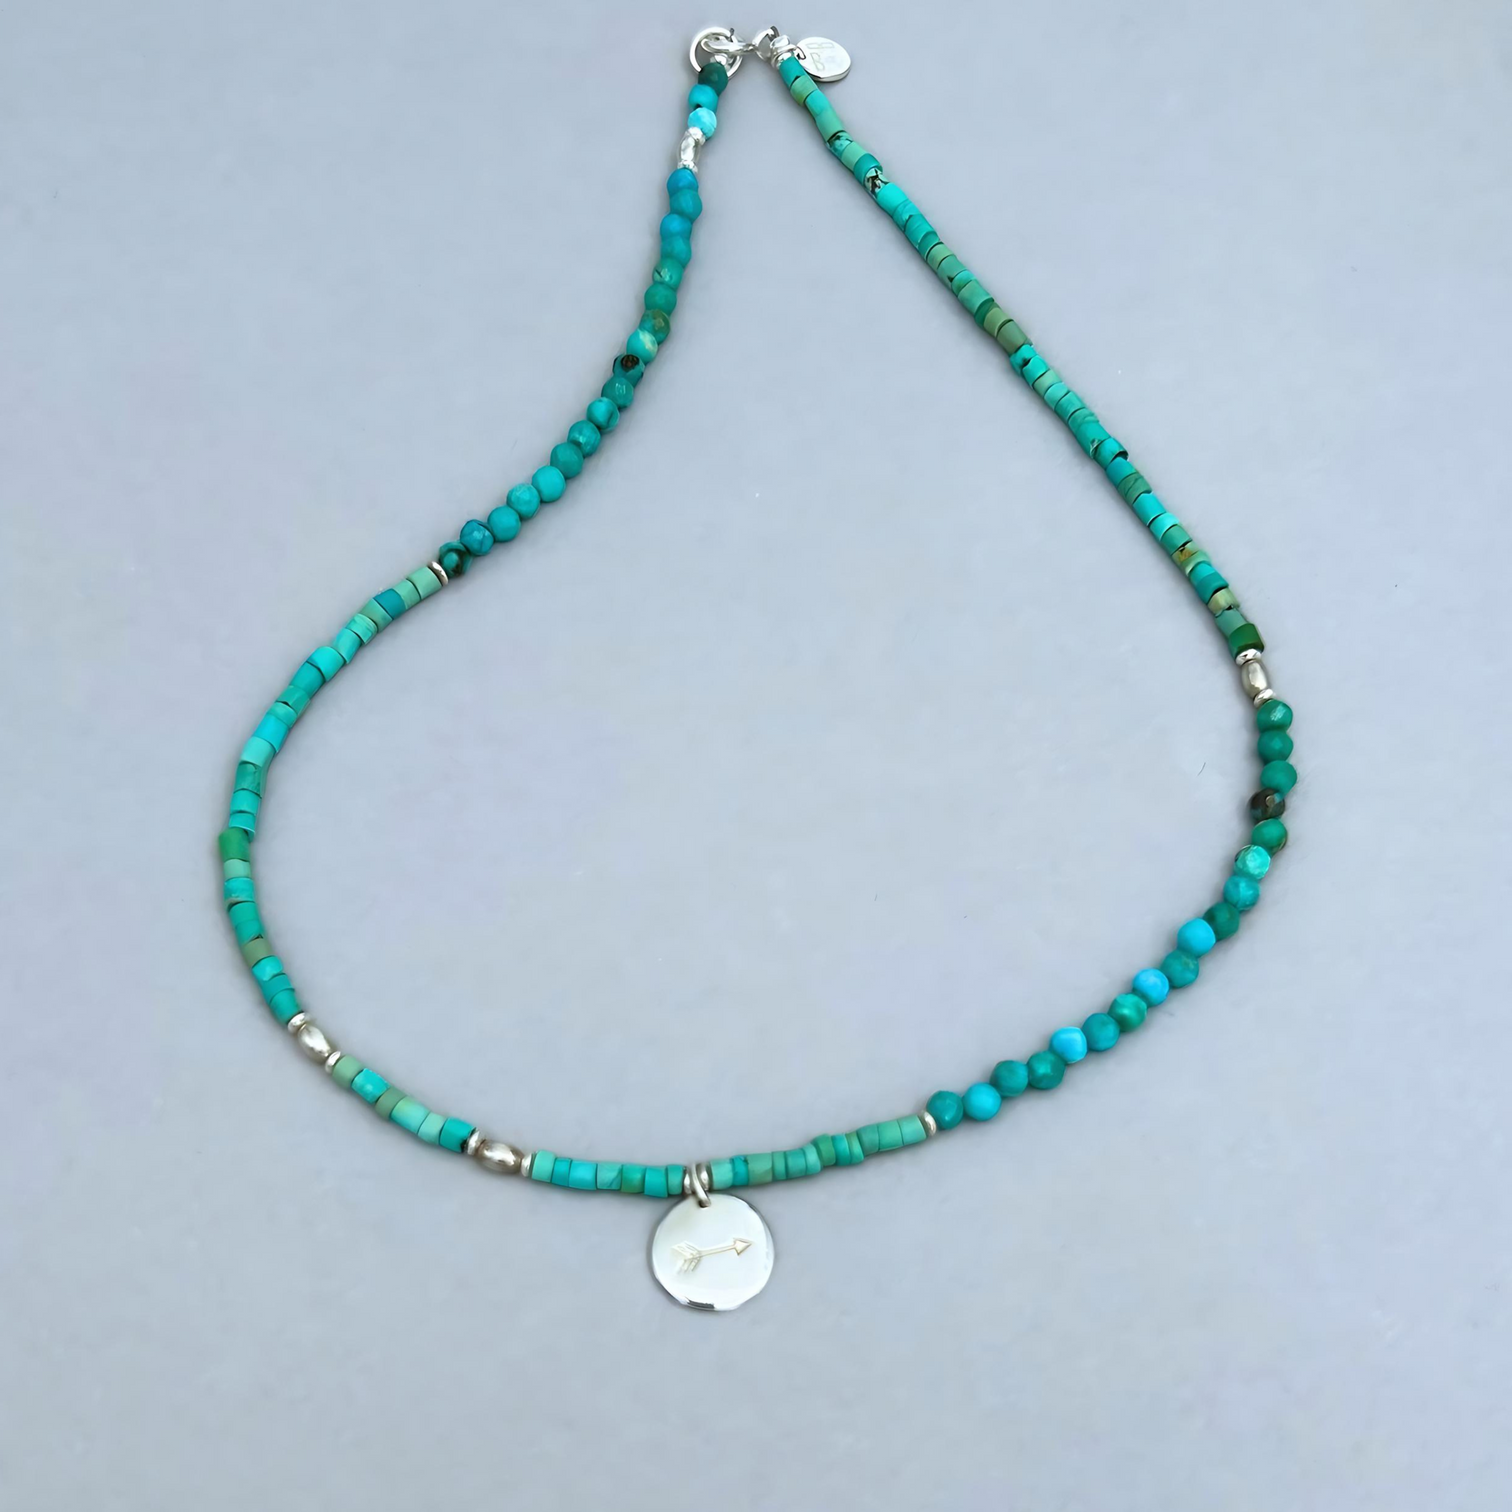 Free Spirit Necklace from Le BijouBIjou made with turquoise rondelles and a silver charm with an arrow.